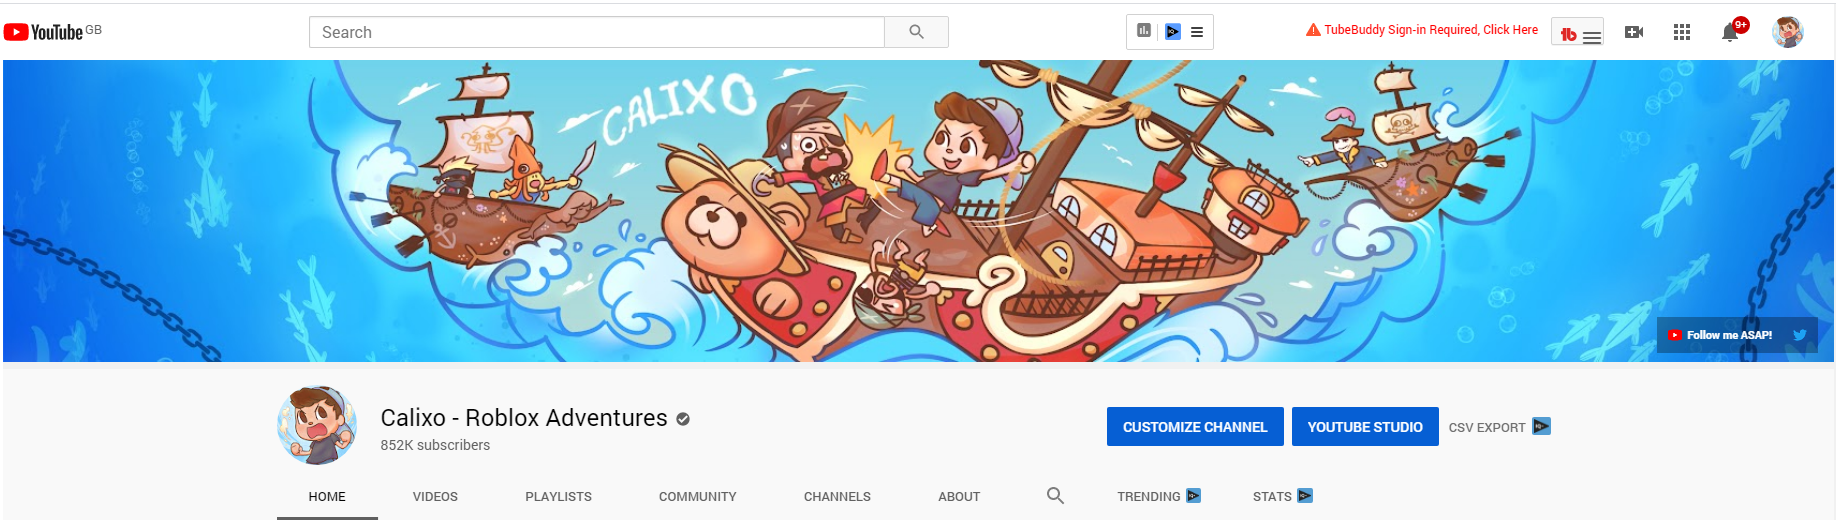 Calixo On Twitter New Banner And Profile Picture What You Guys Think D - calixo roblox profile